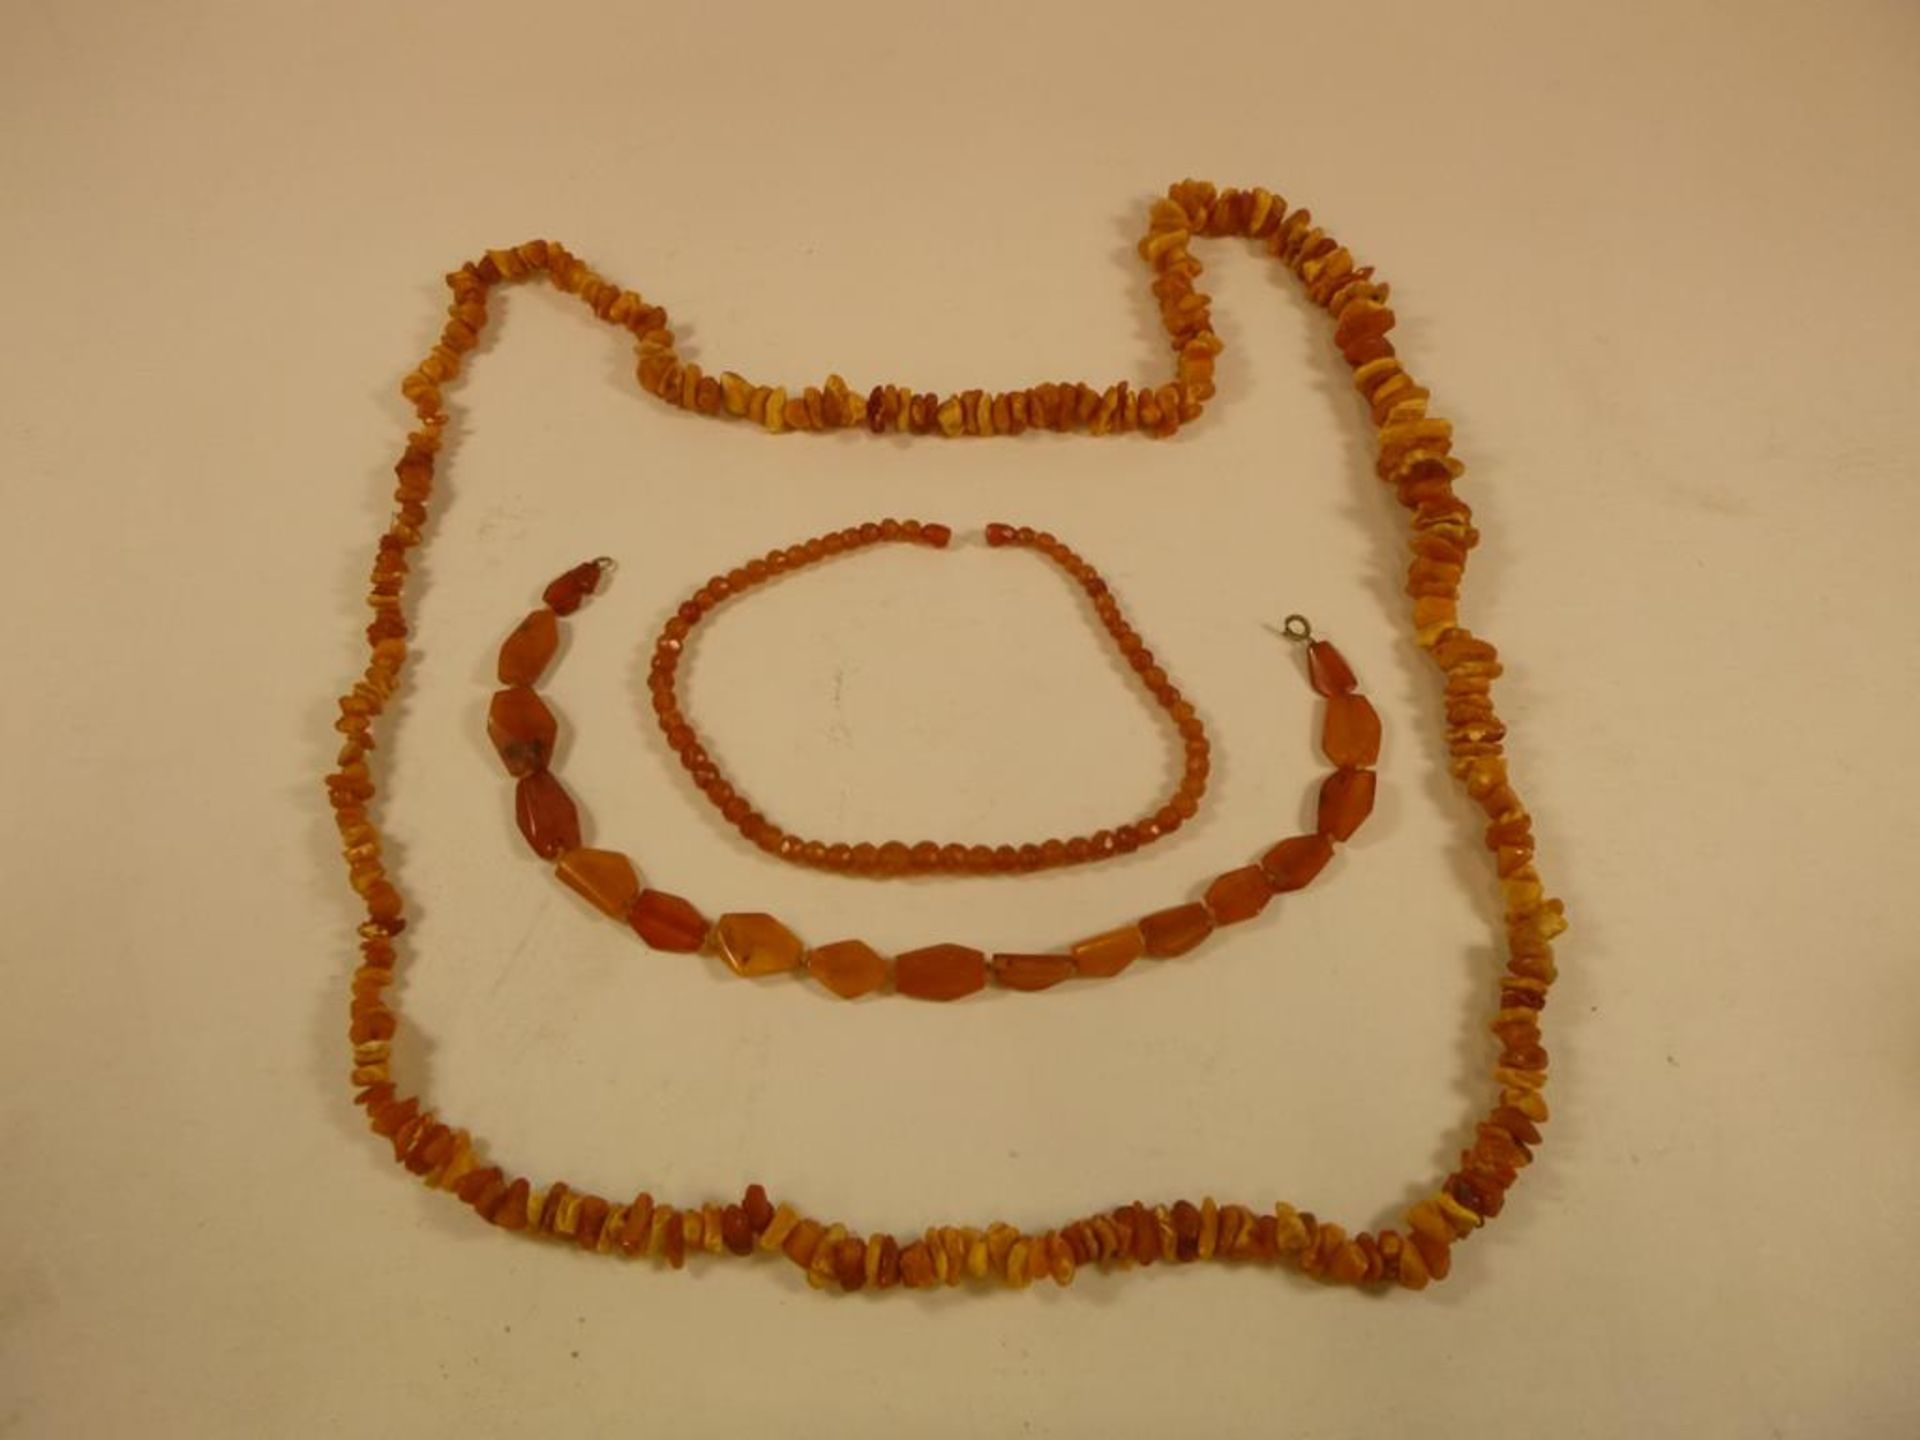 Three Strings of Natural Amber Beads (approx 160g) (est £45-£90)